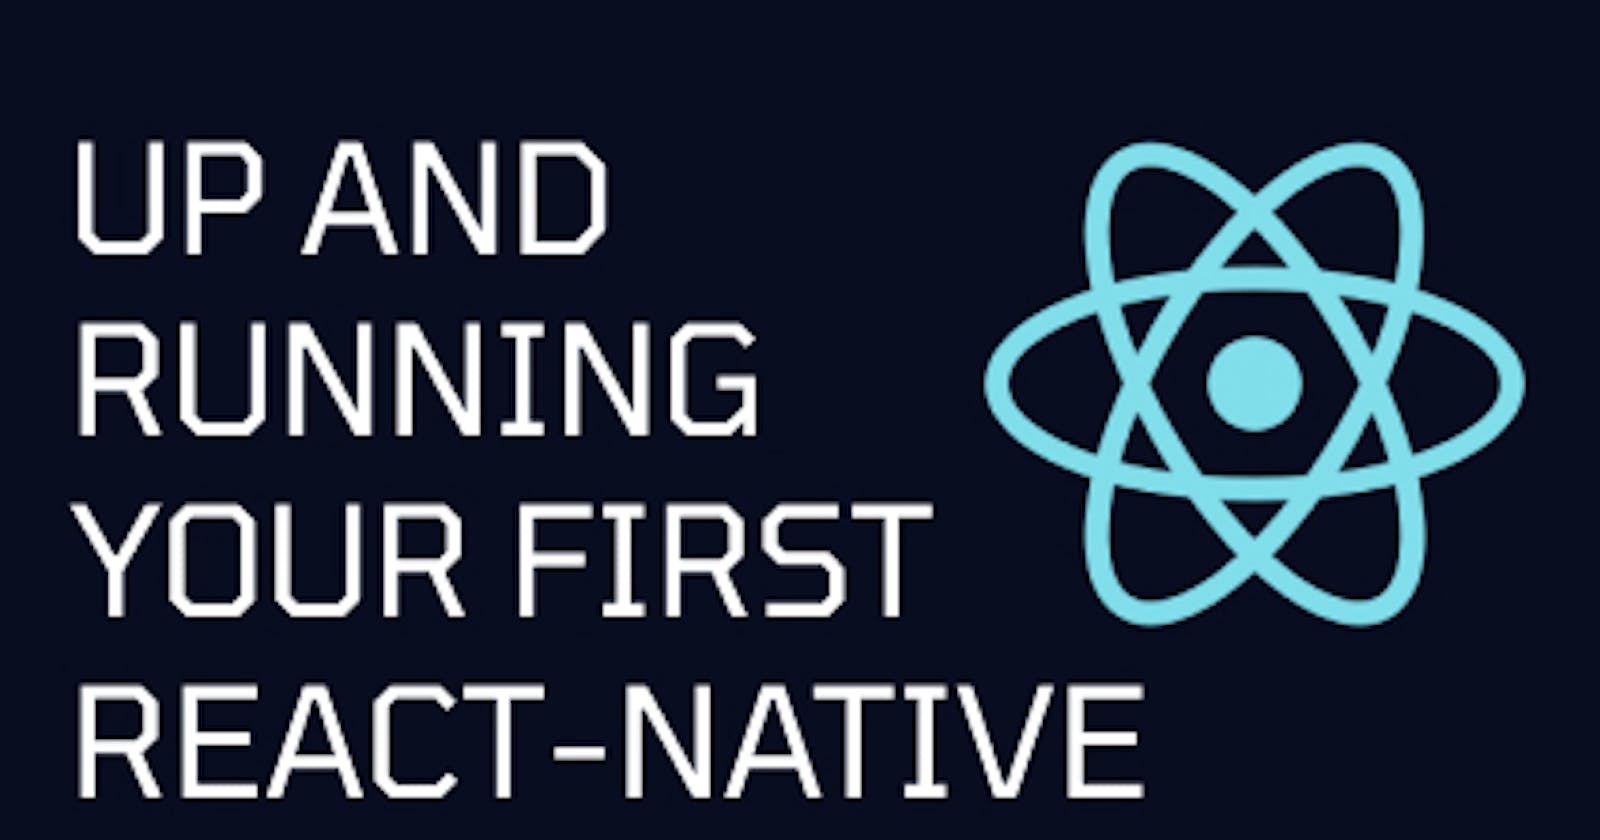 Up and running your first react-native app